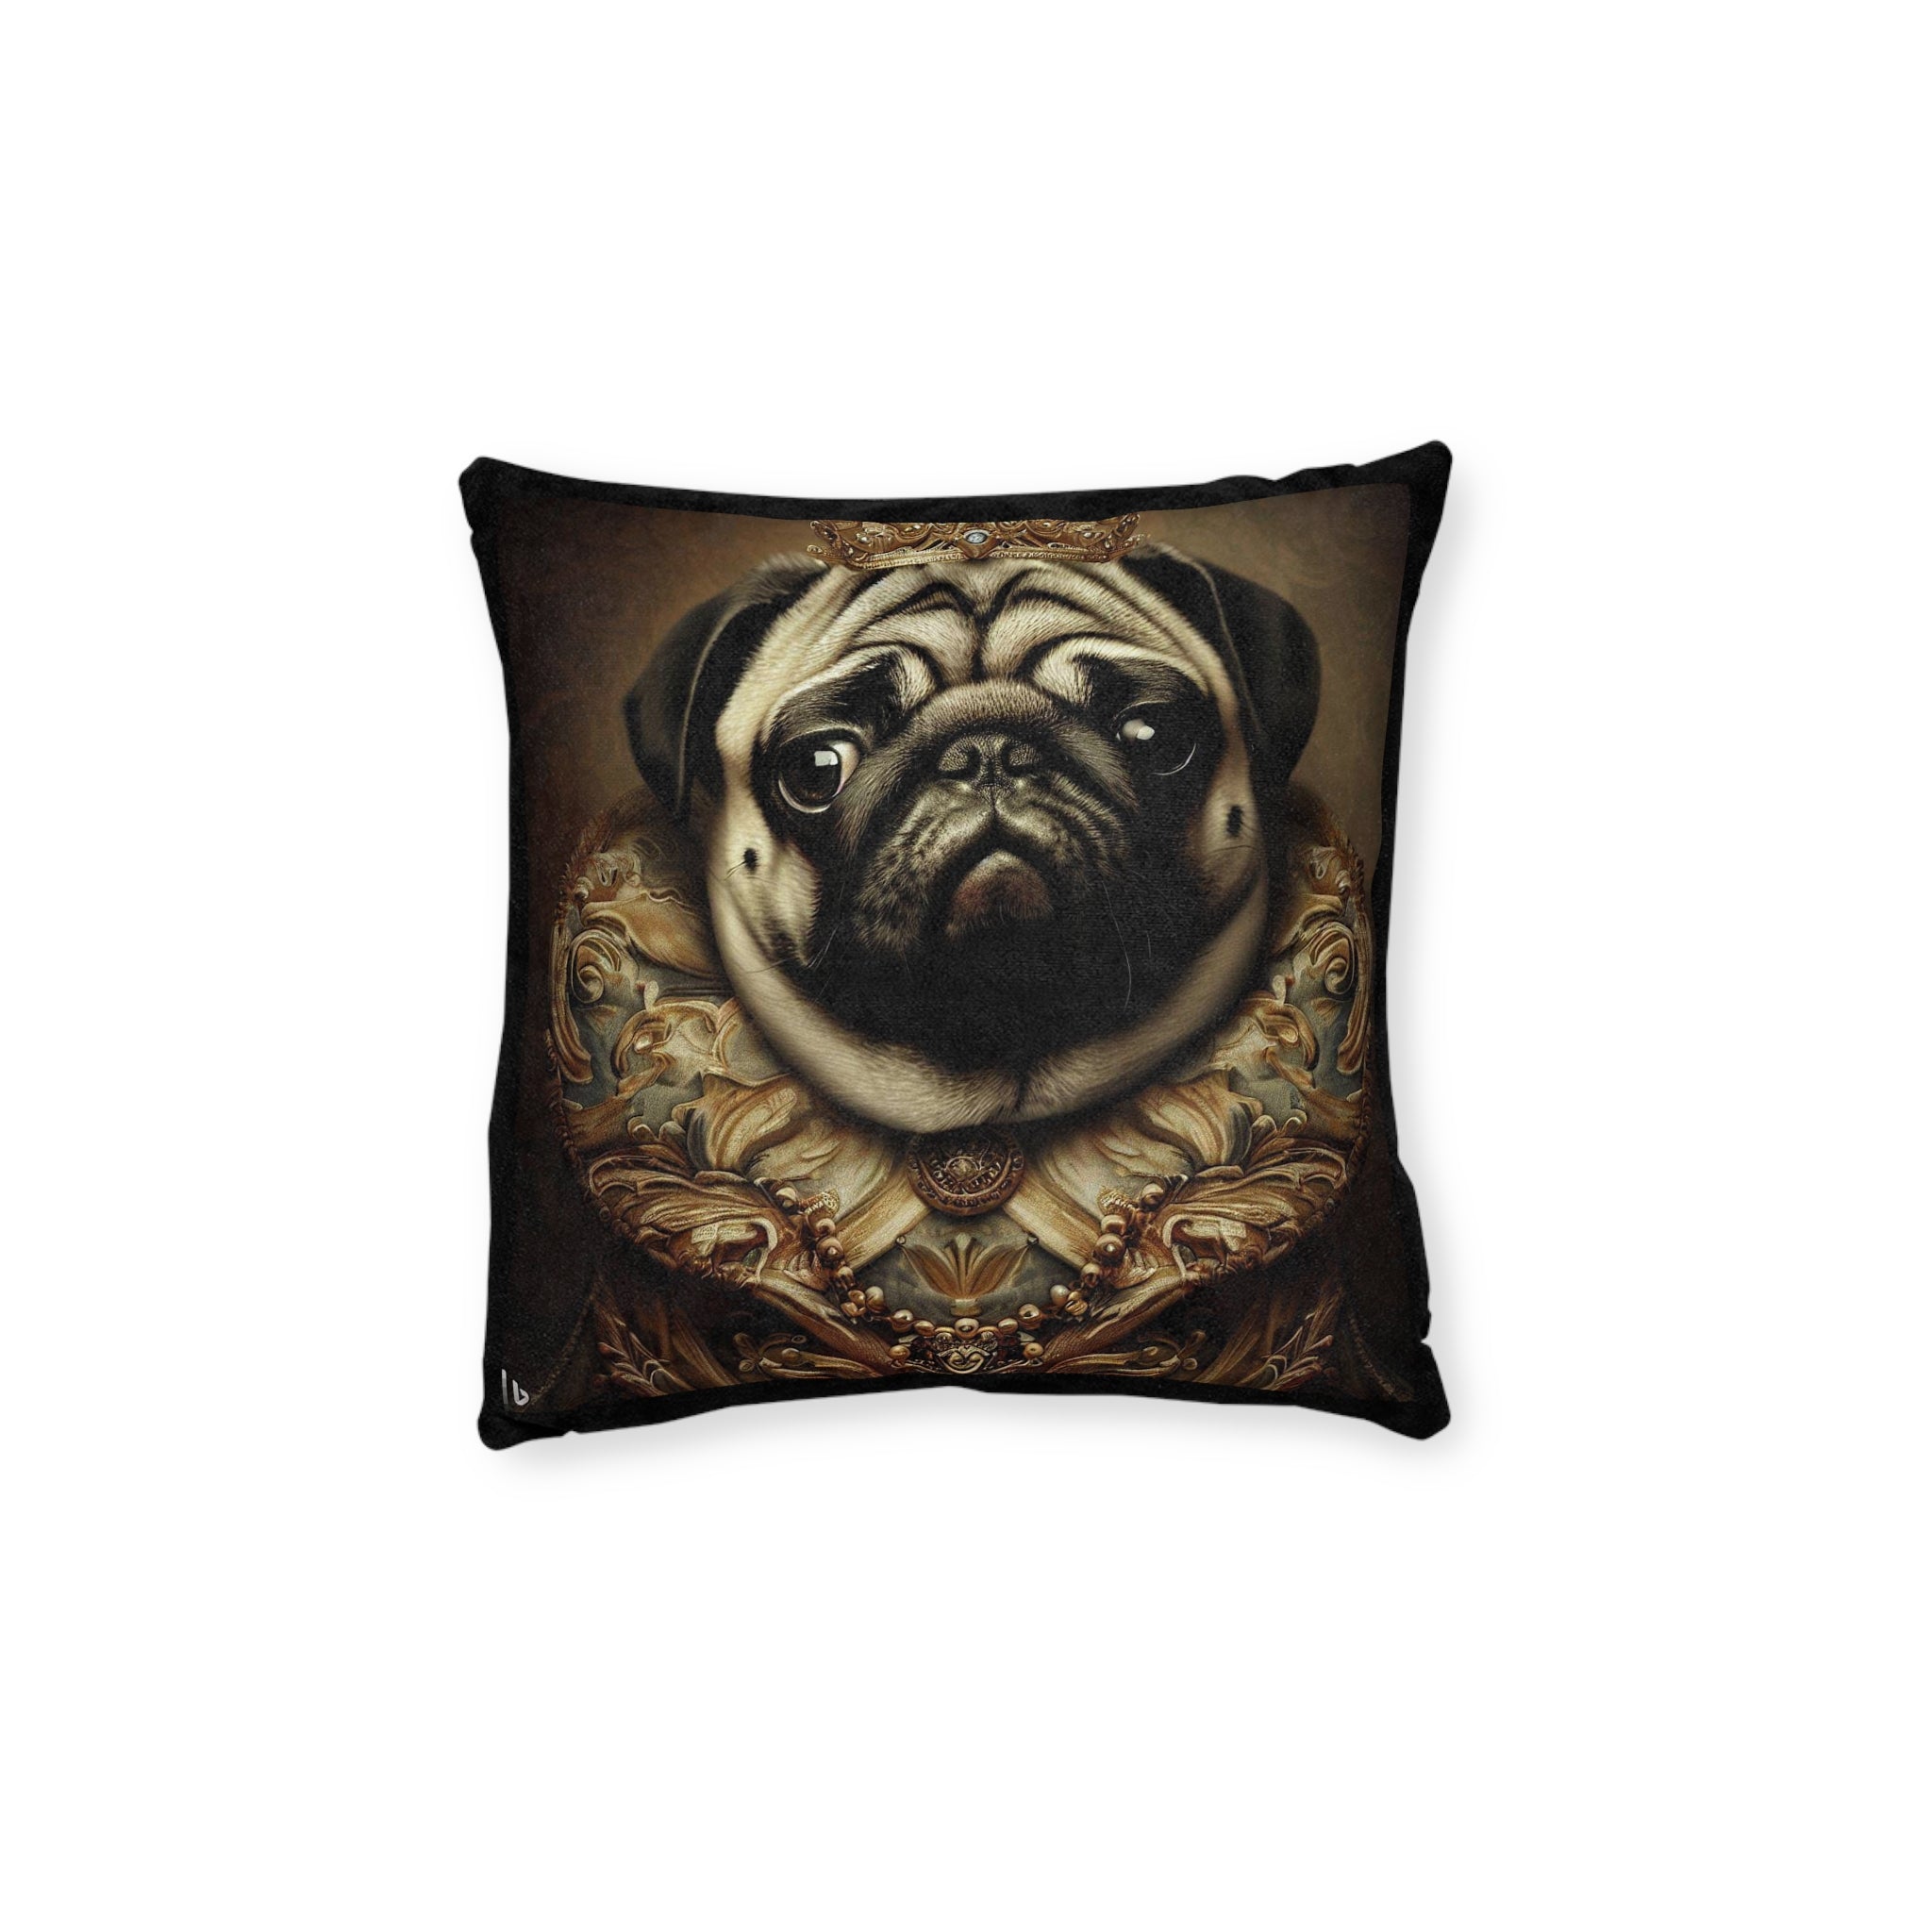 Square Pillow - Pink Back Pug Barroco Style